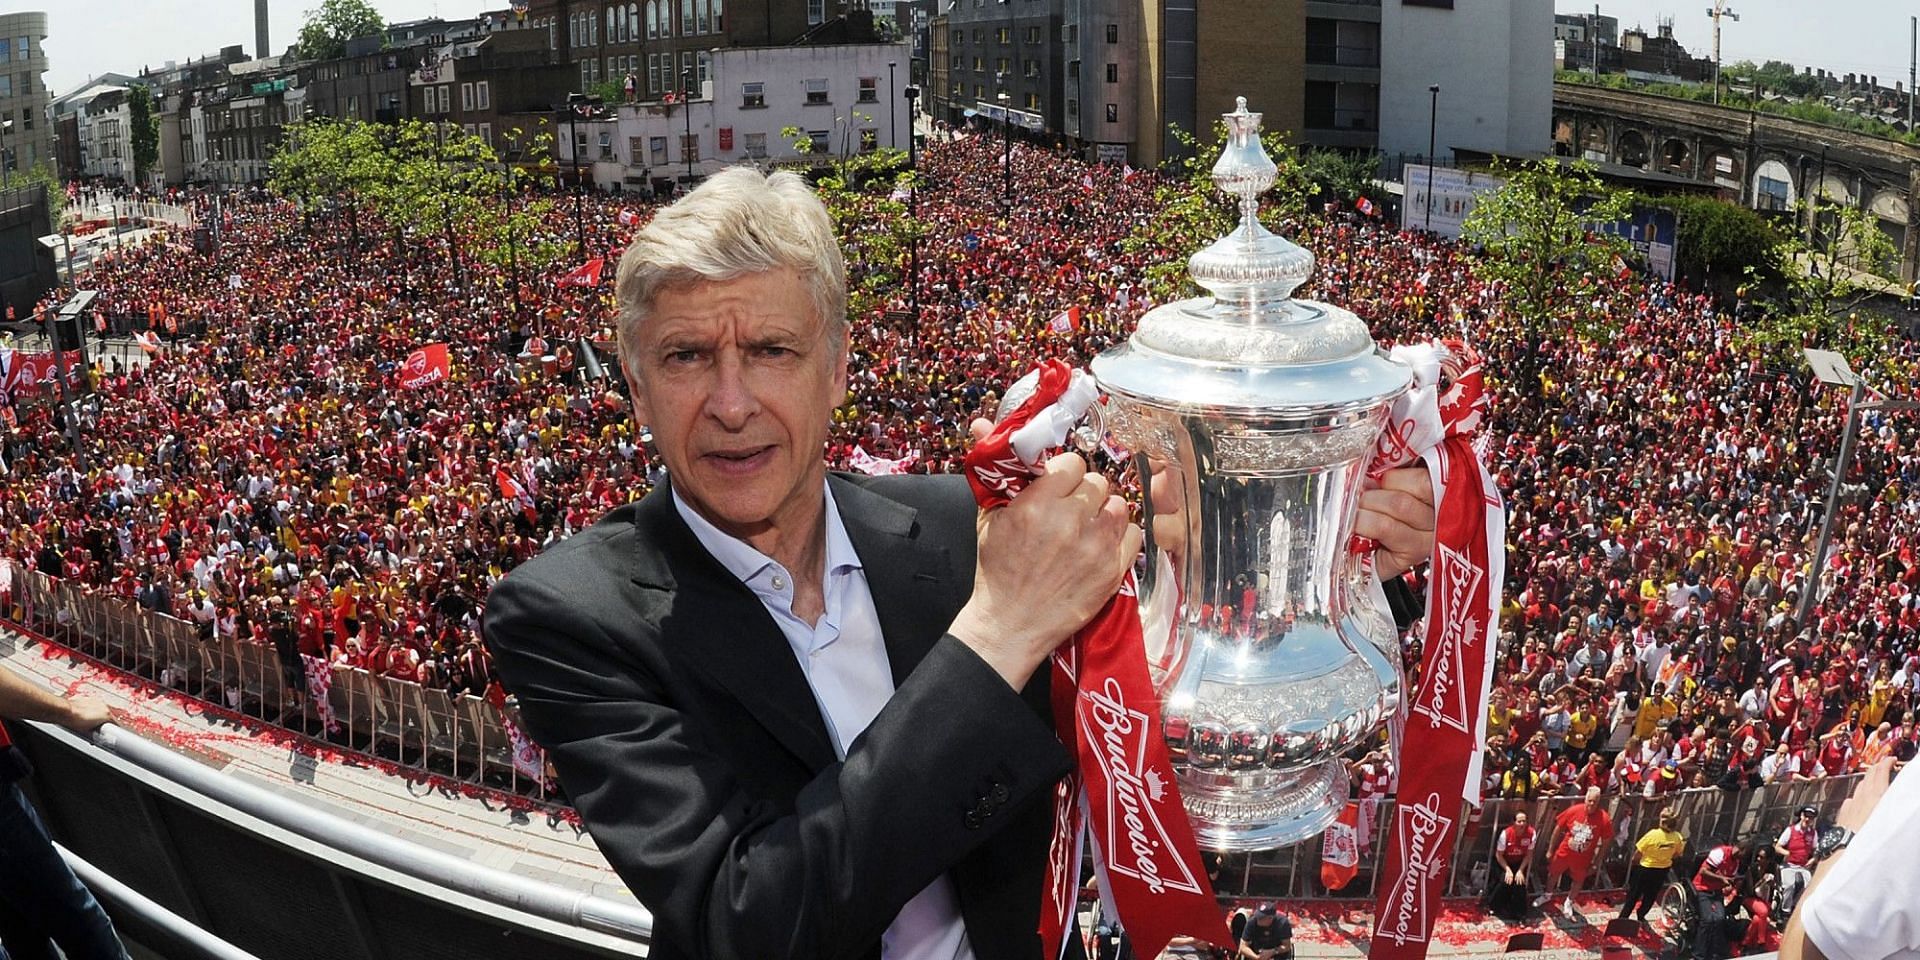 Arsene Wenger is the most successful manager in FA Cup history with seven wins.